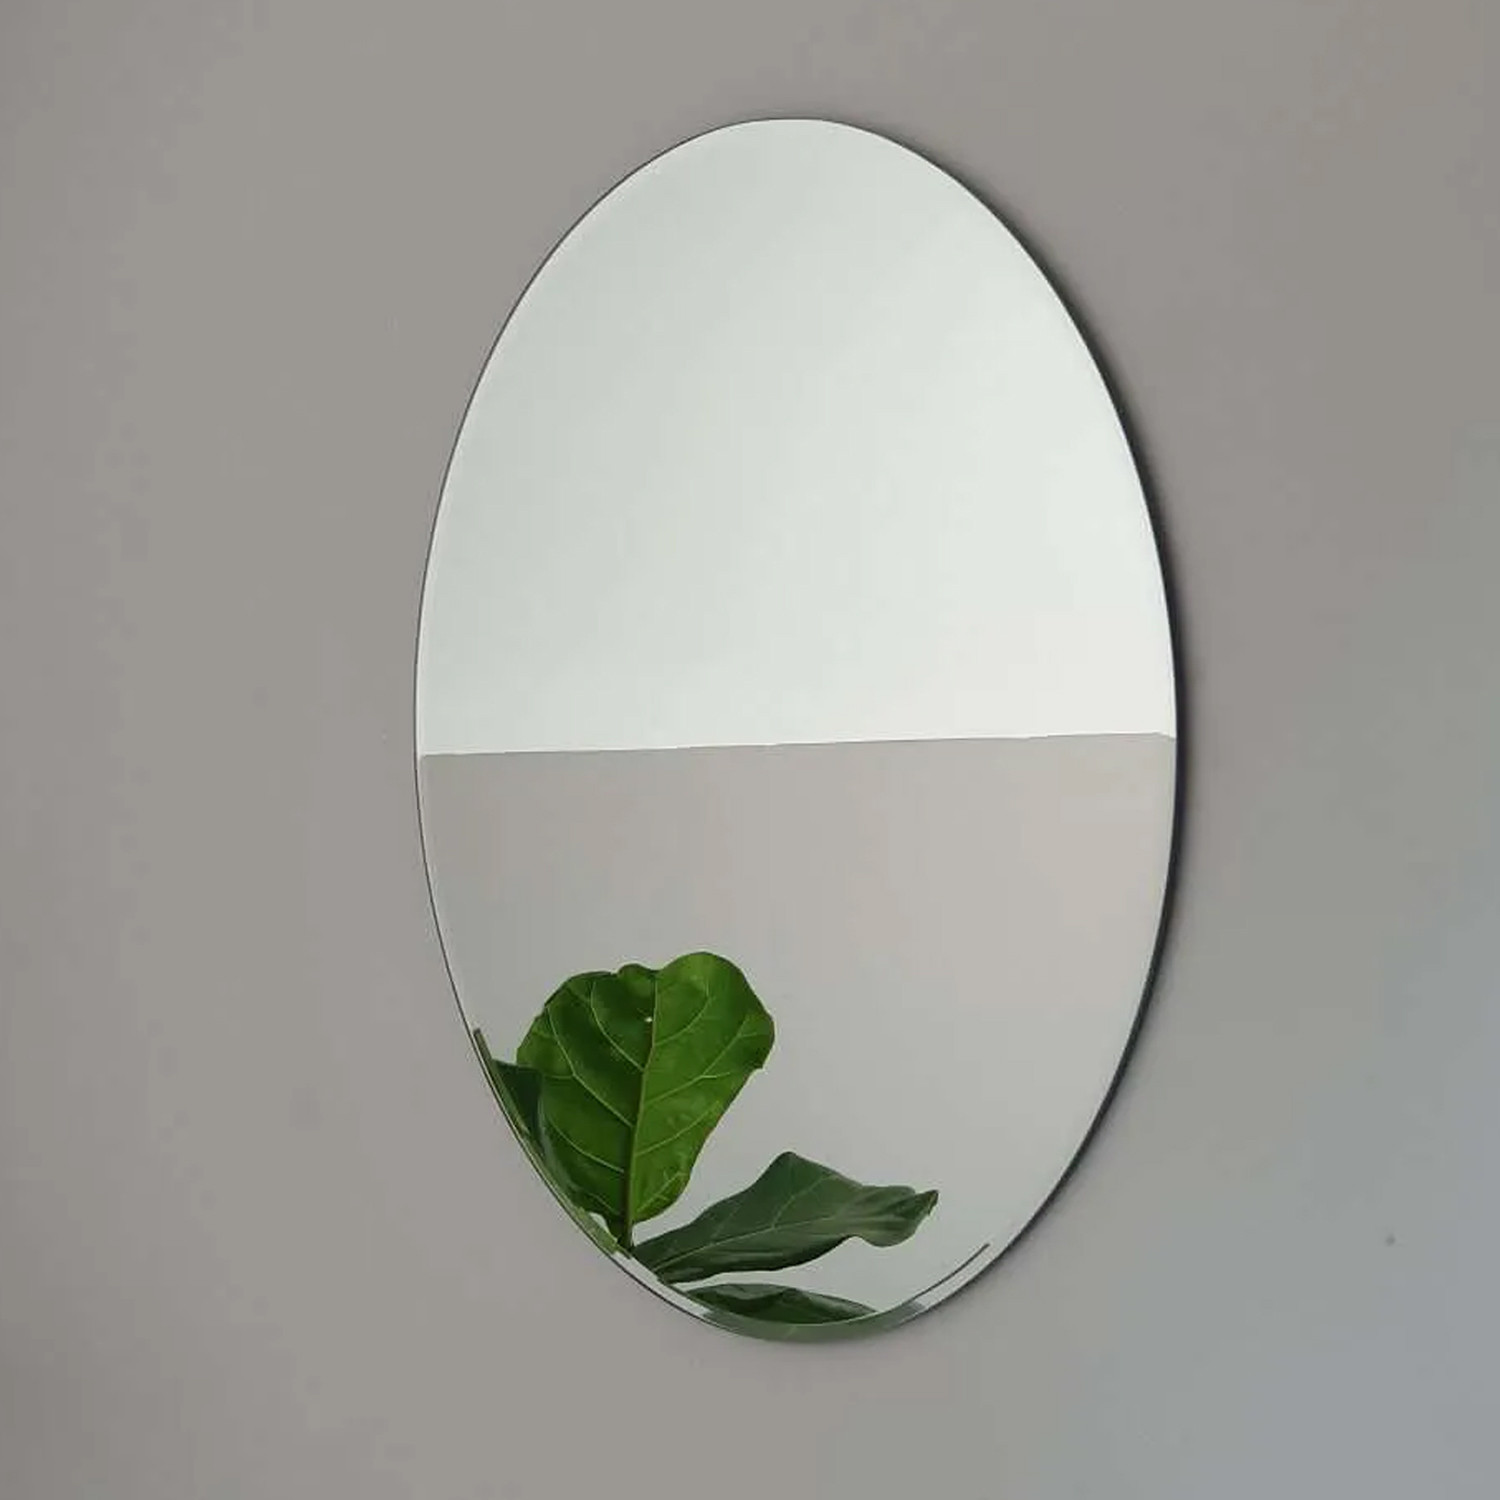 Kuber Industries Self Adhesive Mirror Stickers For Wall|Oval Wall Mirror Stickers|Flexible Mirror For Wall Décor, Living Room|Premium Acrylic Material 